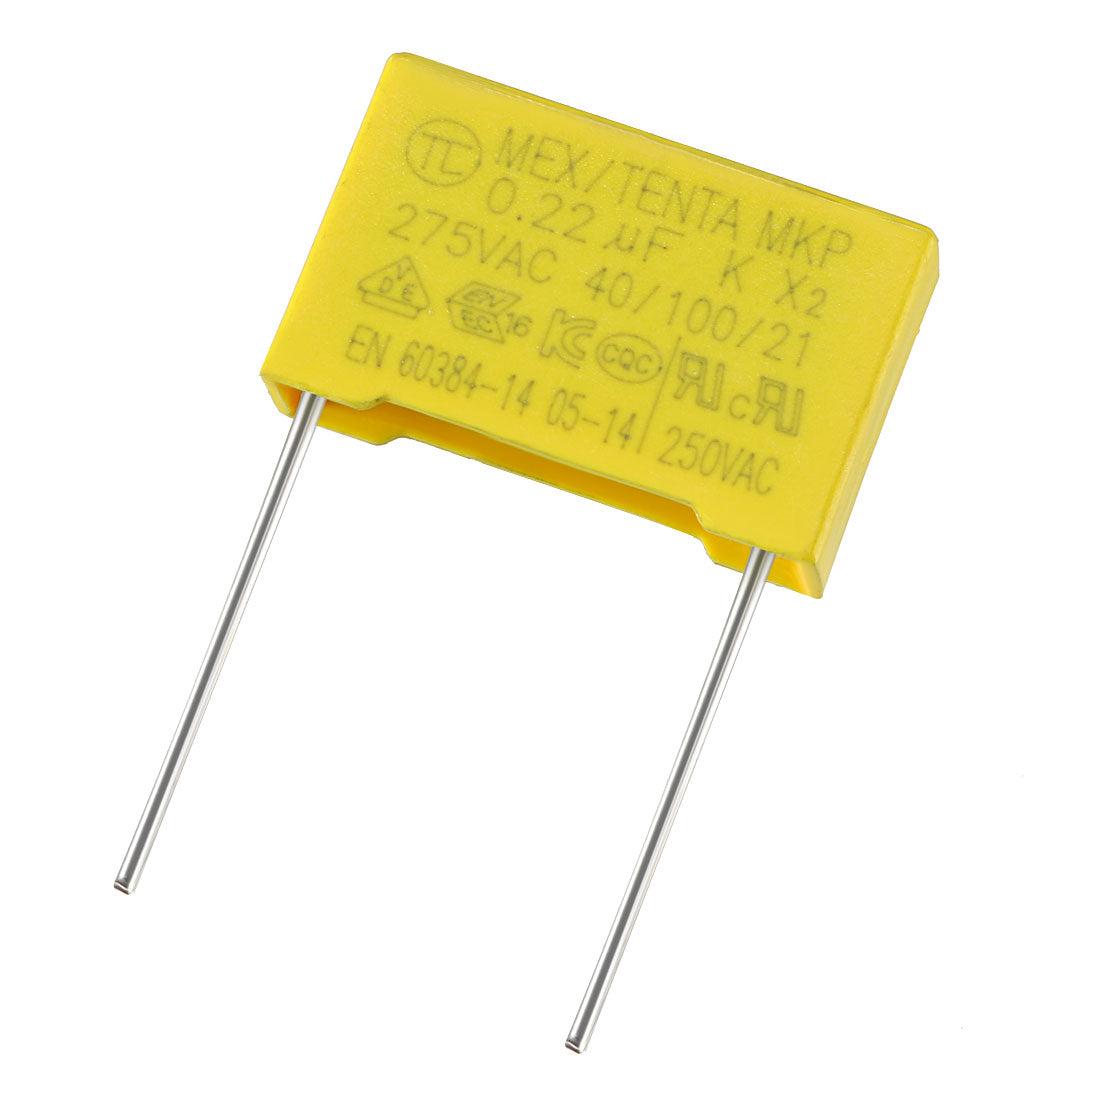 uxcell Uxcell Safety Capacitors Polypropylene Film 0.22uF 275VAC X2 MKP 21mm Pin Pitch 5 Pcs